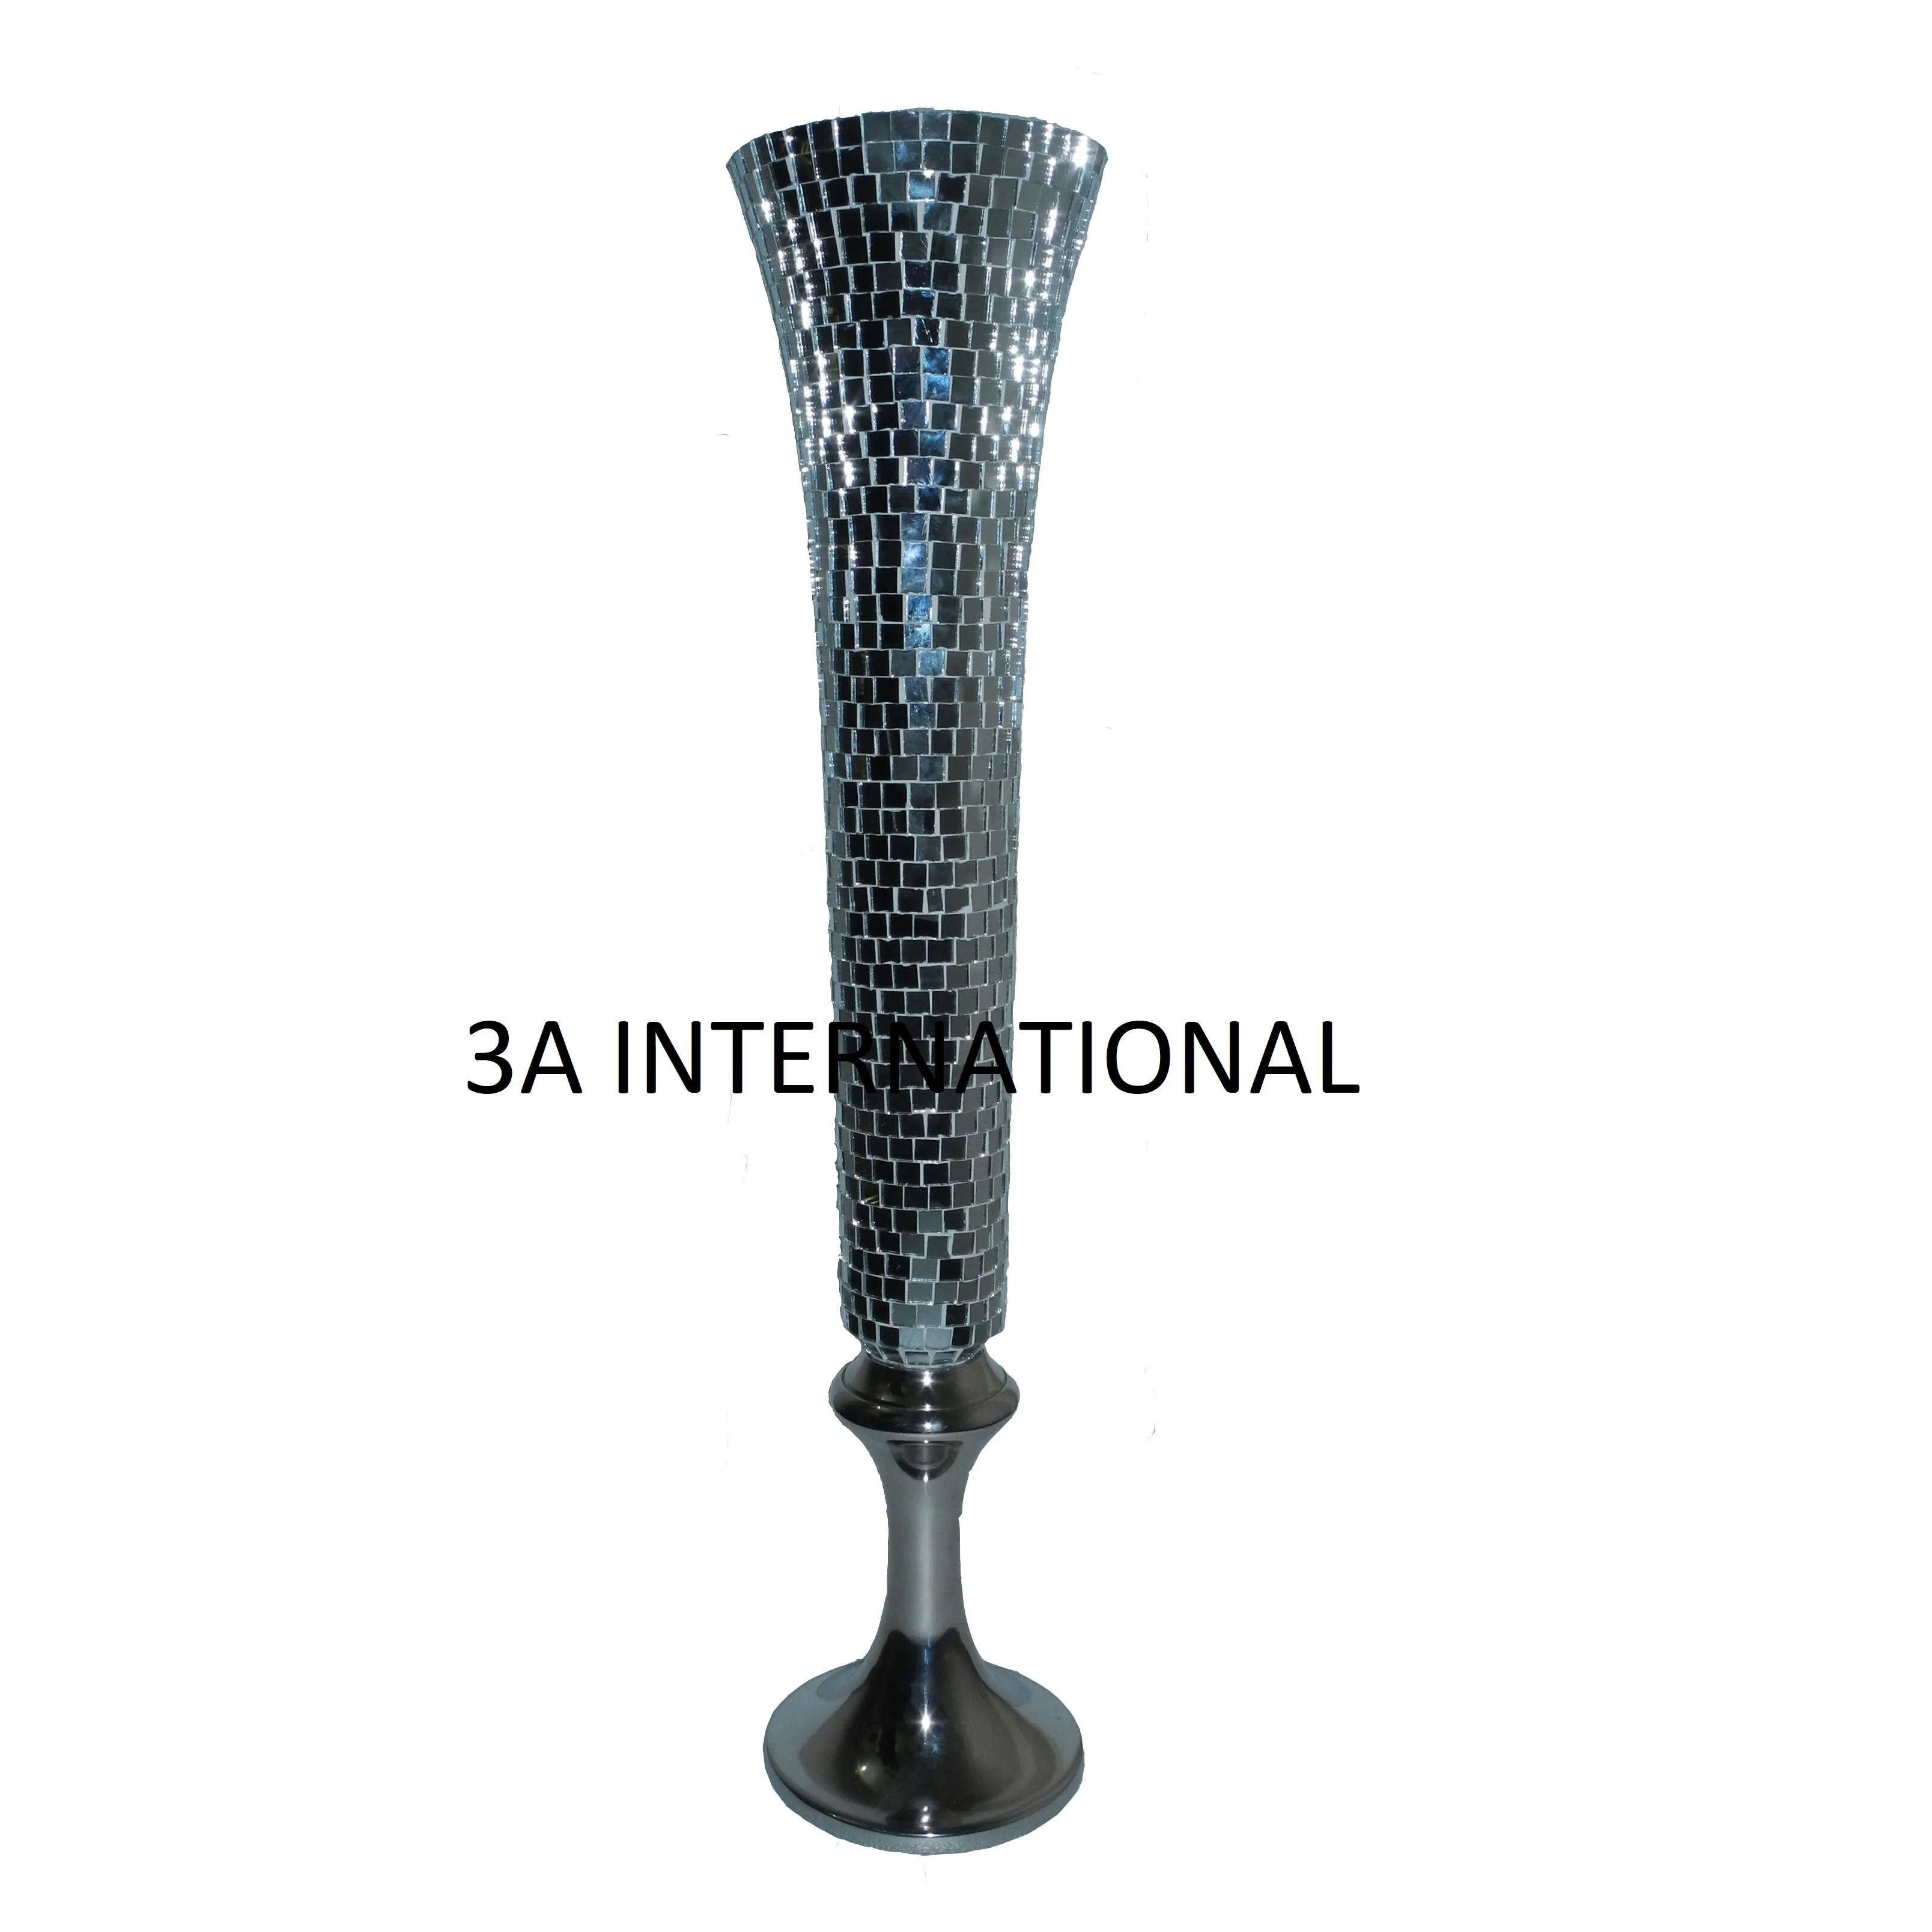 
Flower Vases For Wedding Decoration and home decor flower vase gift ware and table ware item hand made flower vase 